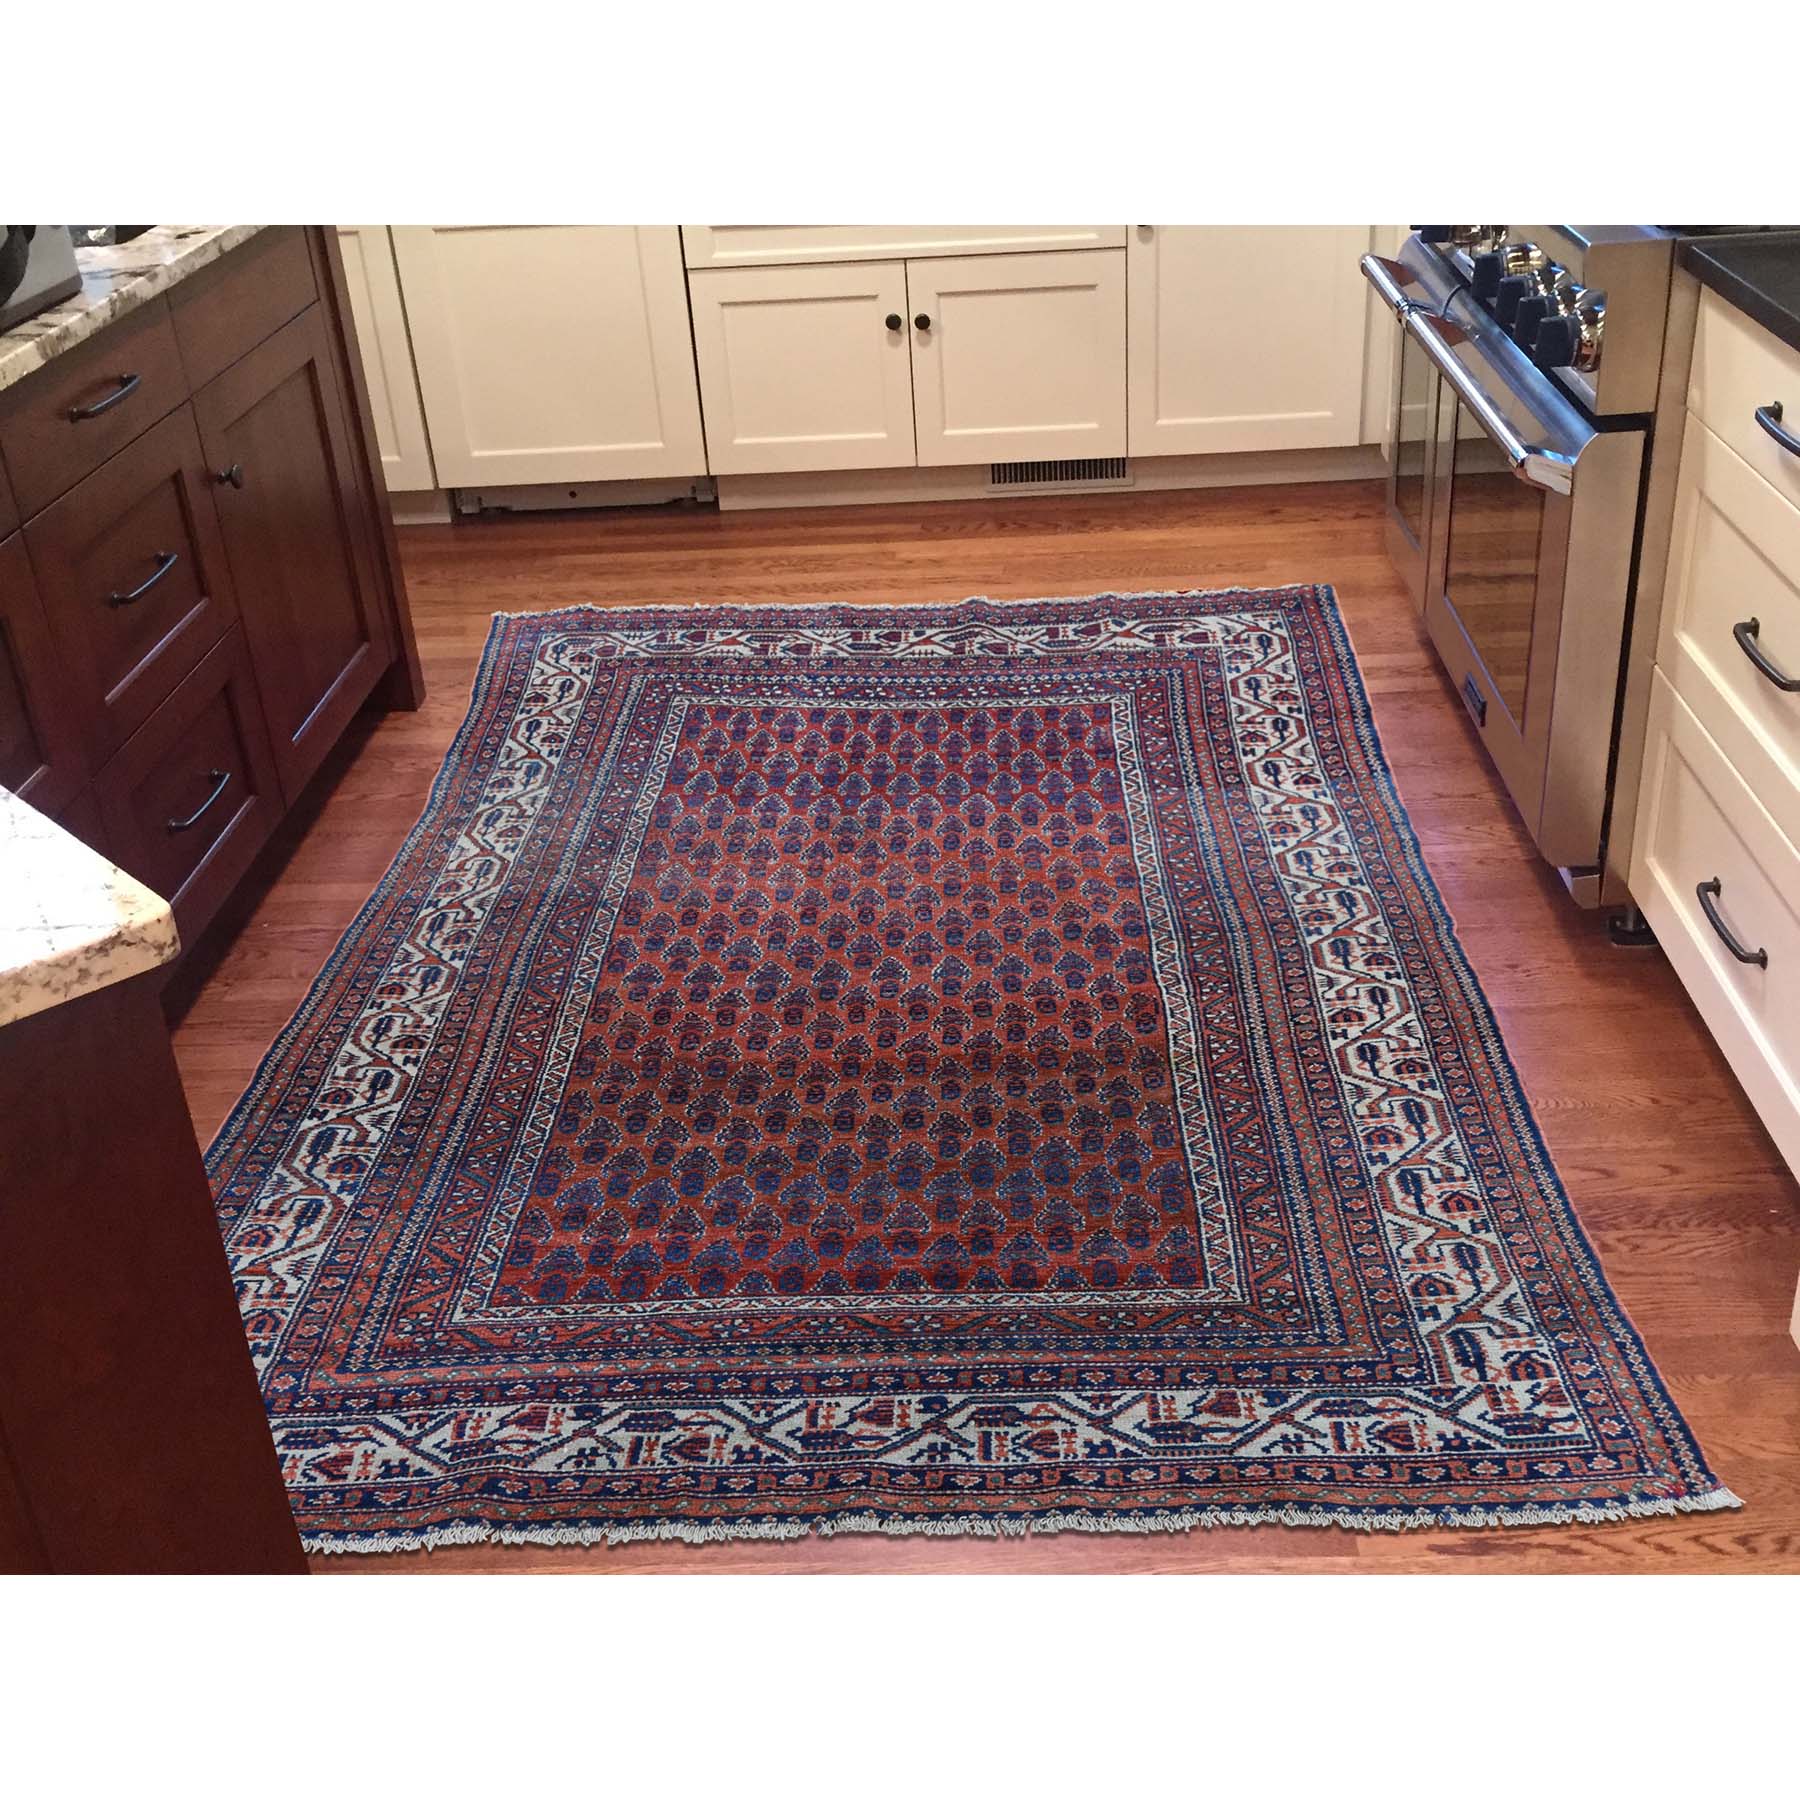 4'5"x6'5" Antique Persian Seraband Good Condition Even Wear Pure Wool Hand Woven Oriental Rug 